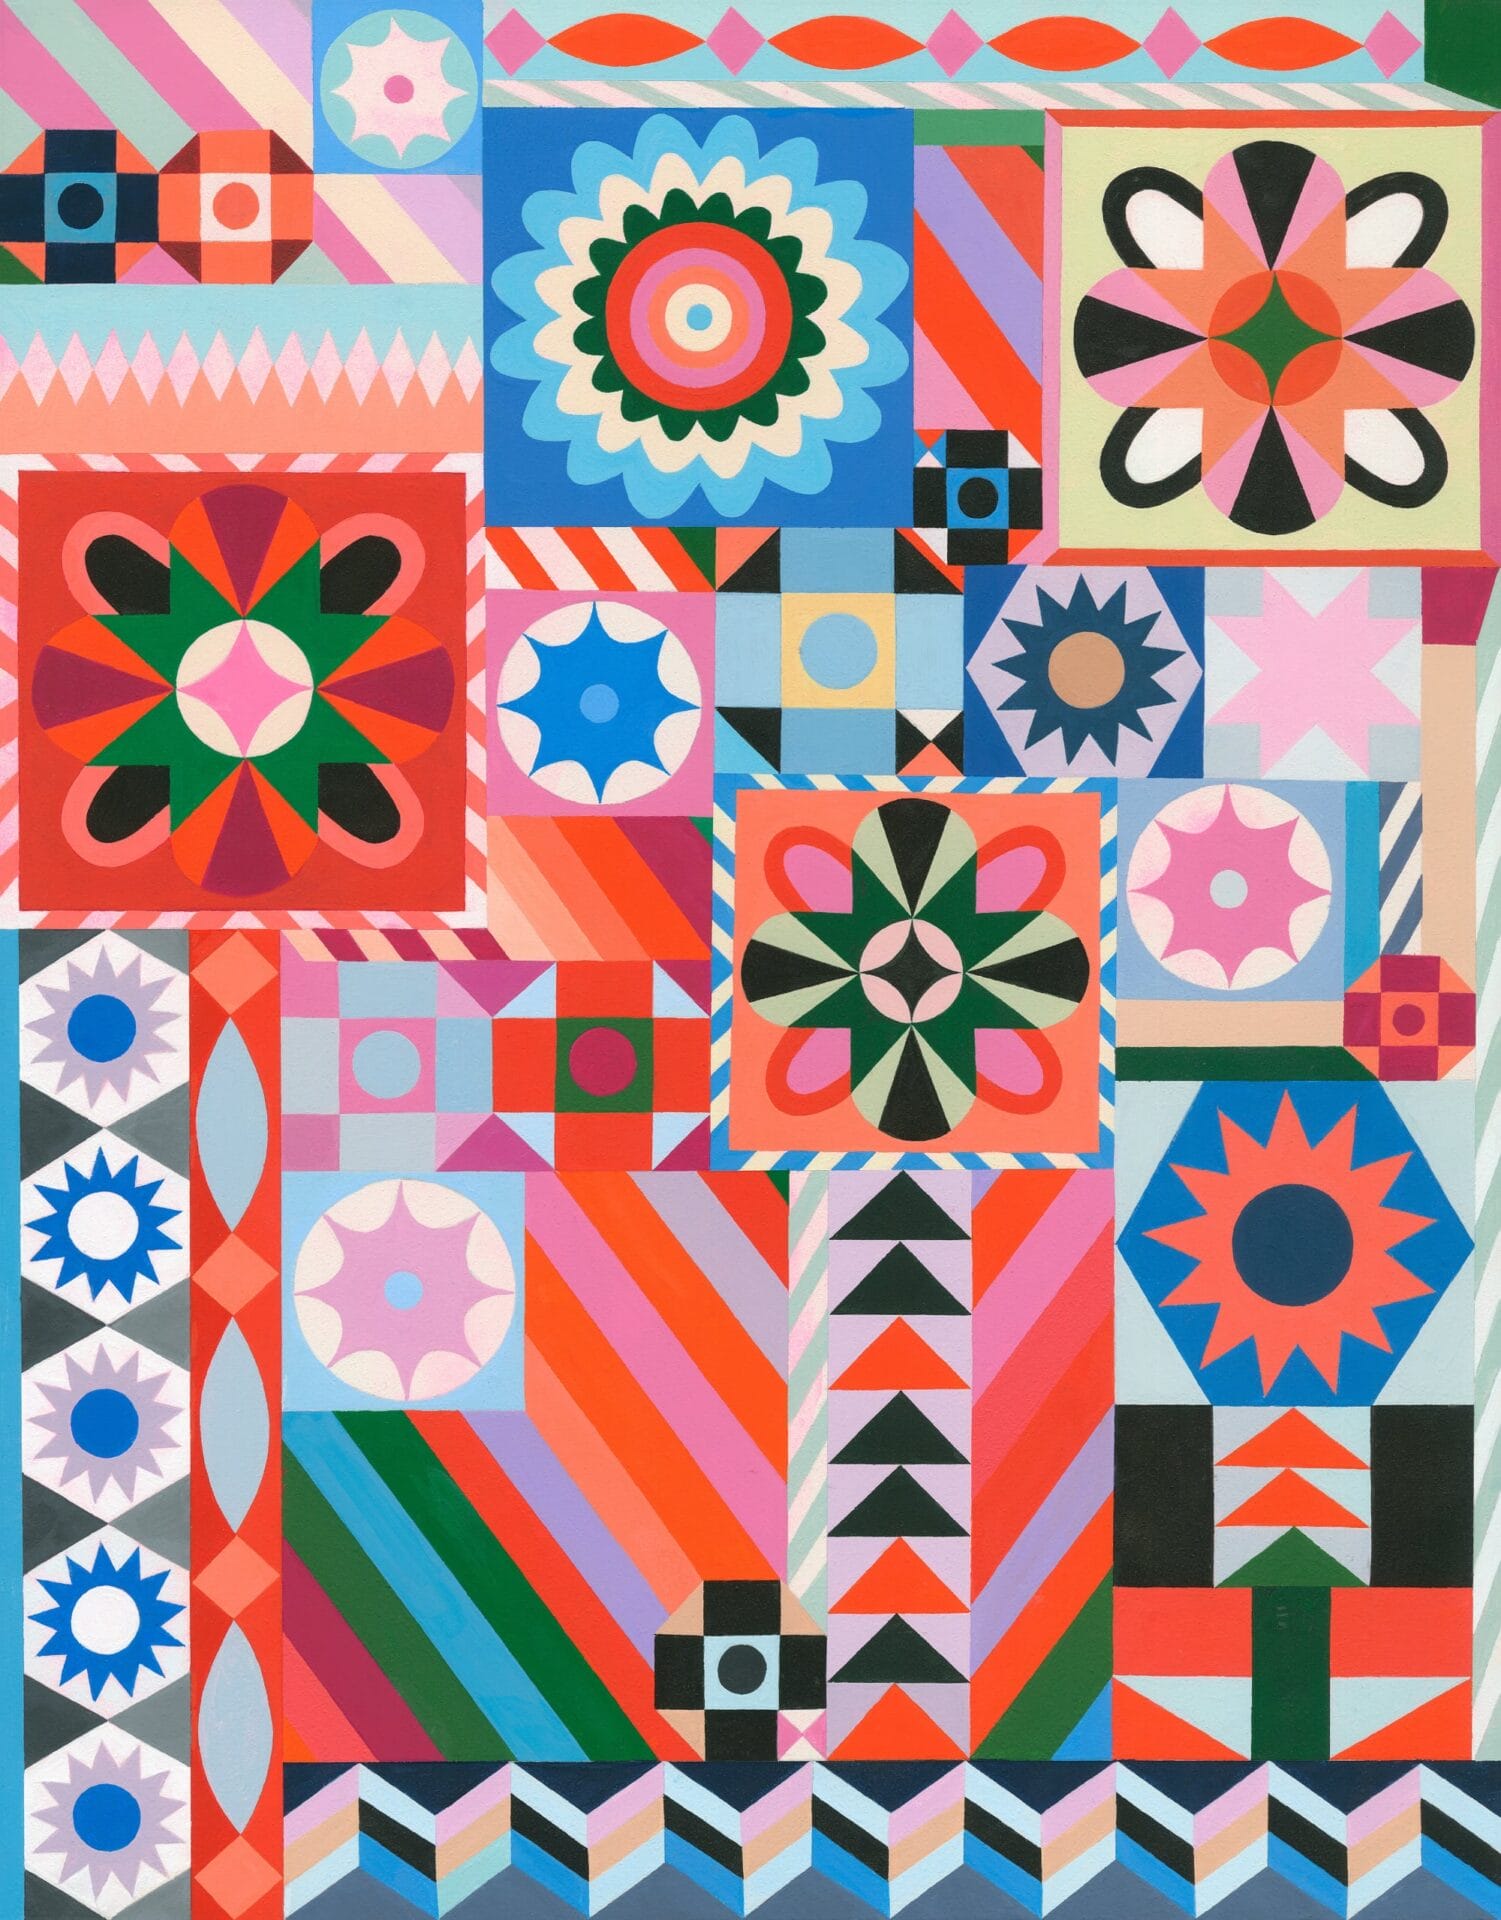 a patchwork painting with stripes, shapes, and various motifs in a pink and red palette